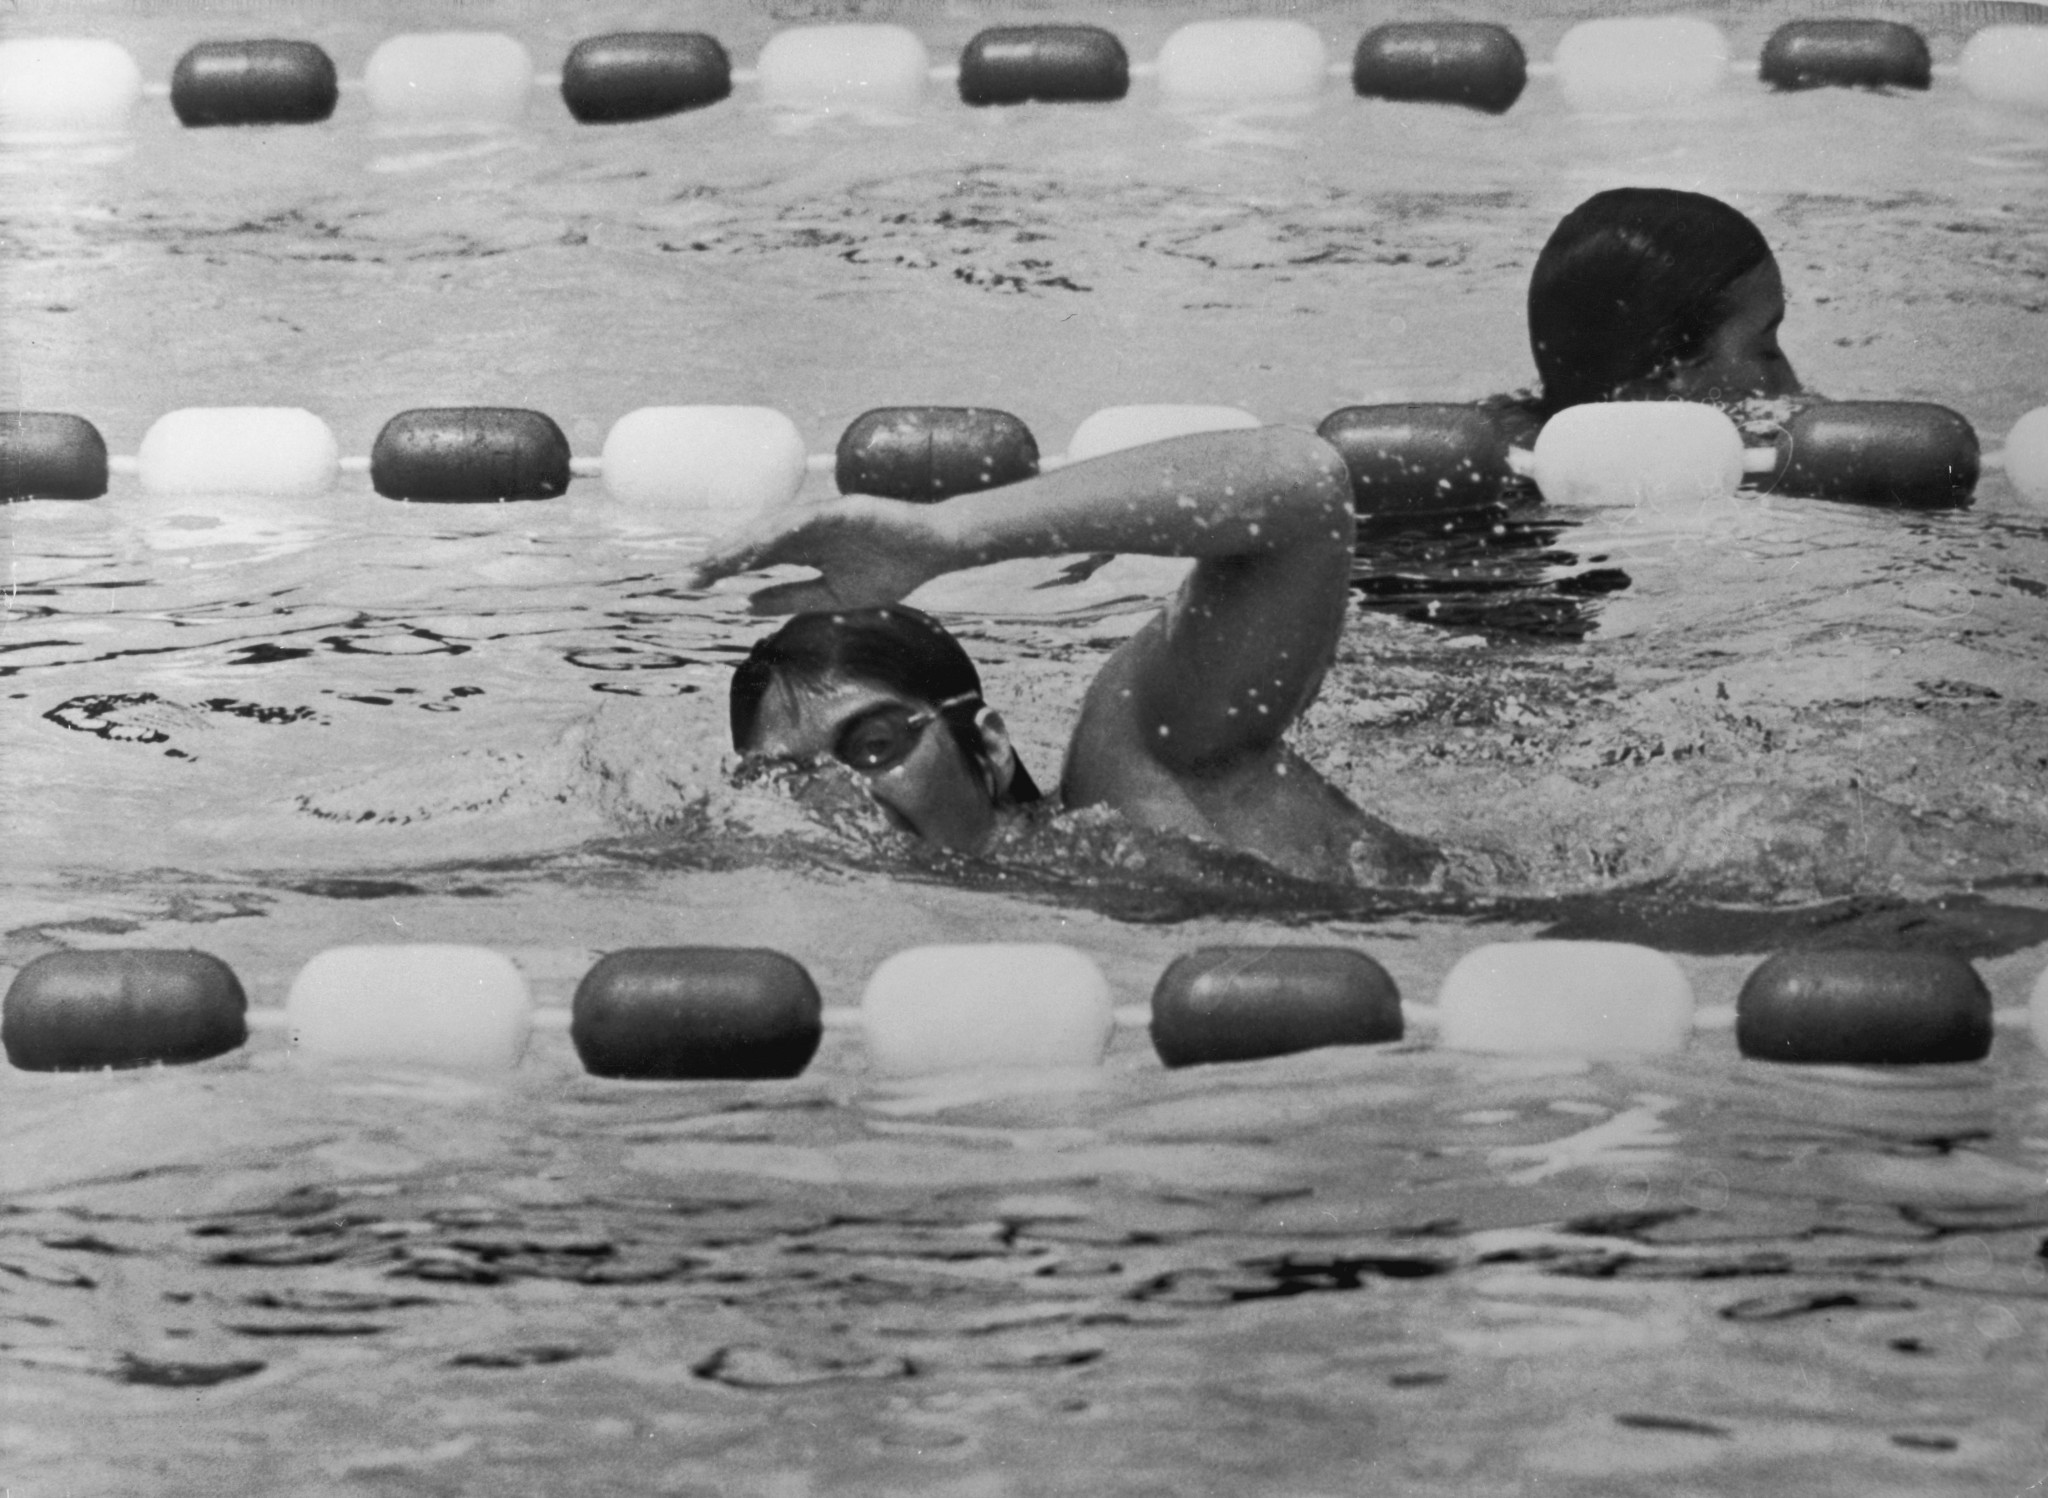 Australian swimmer Dawn Fraser was the undoubted star of Perth 1962 ©Getty Images